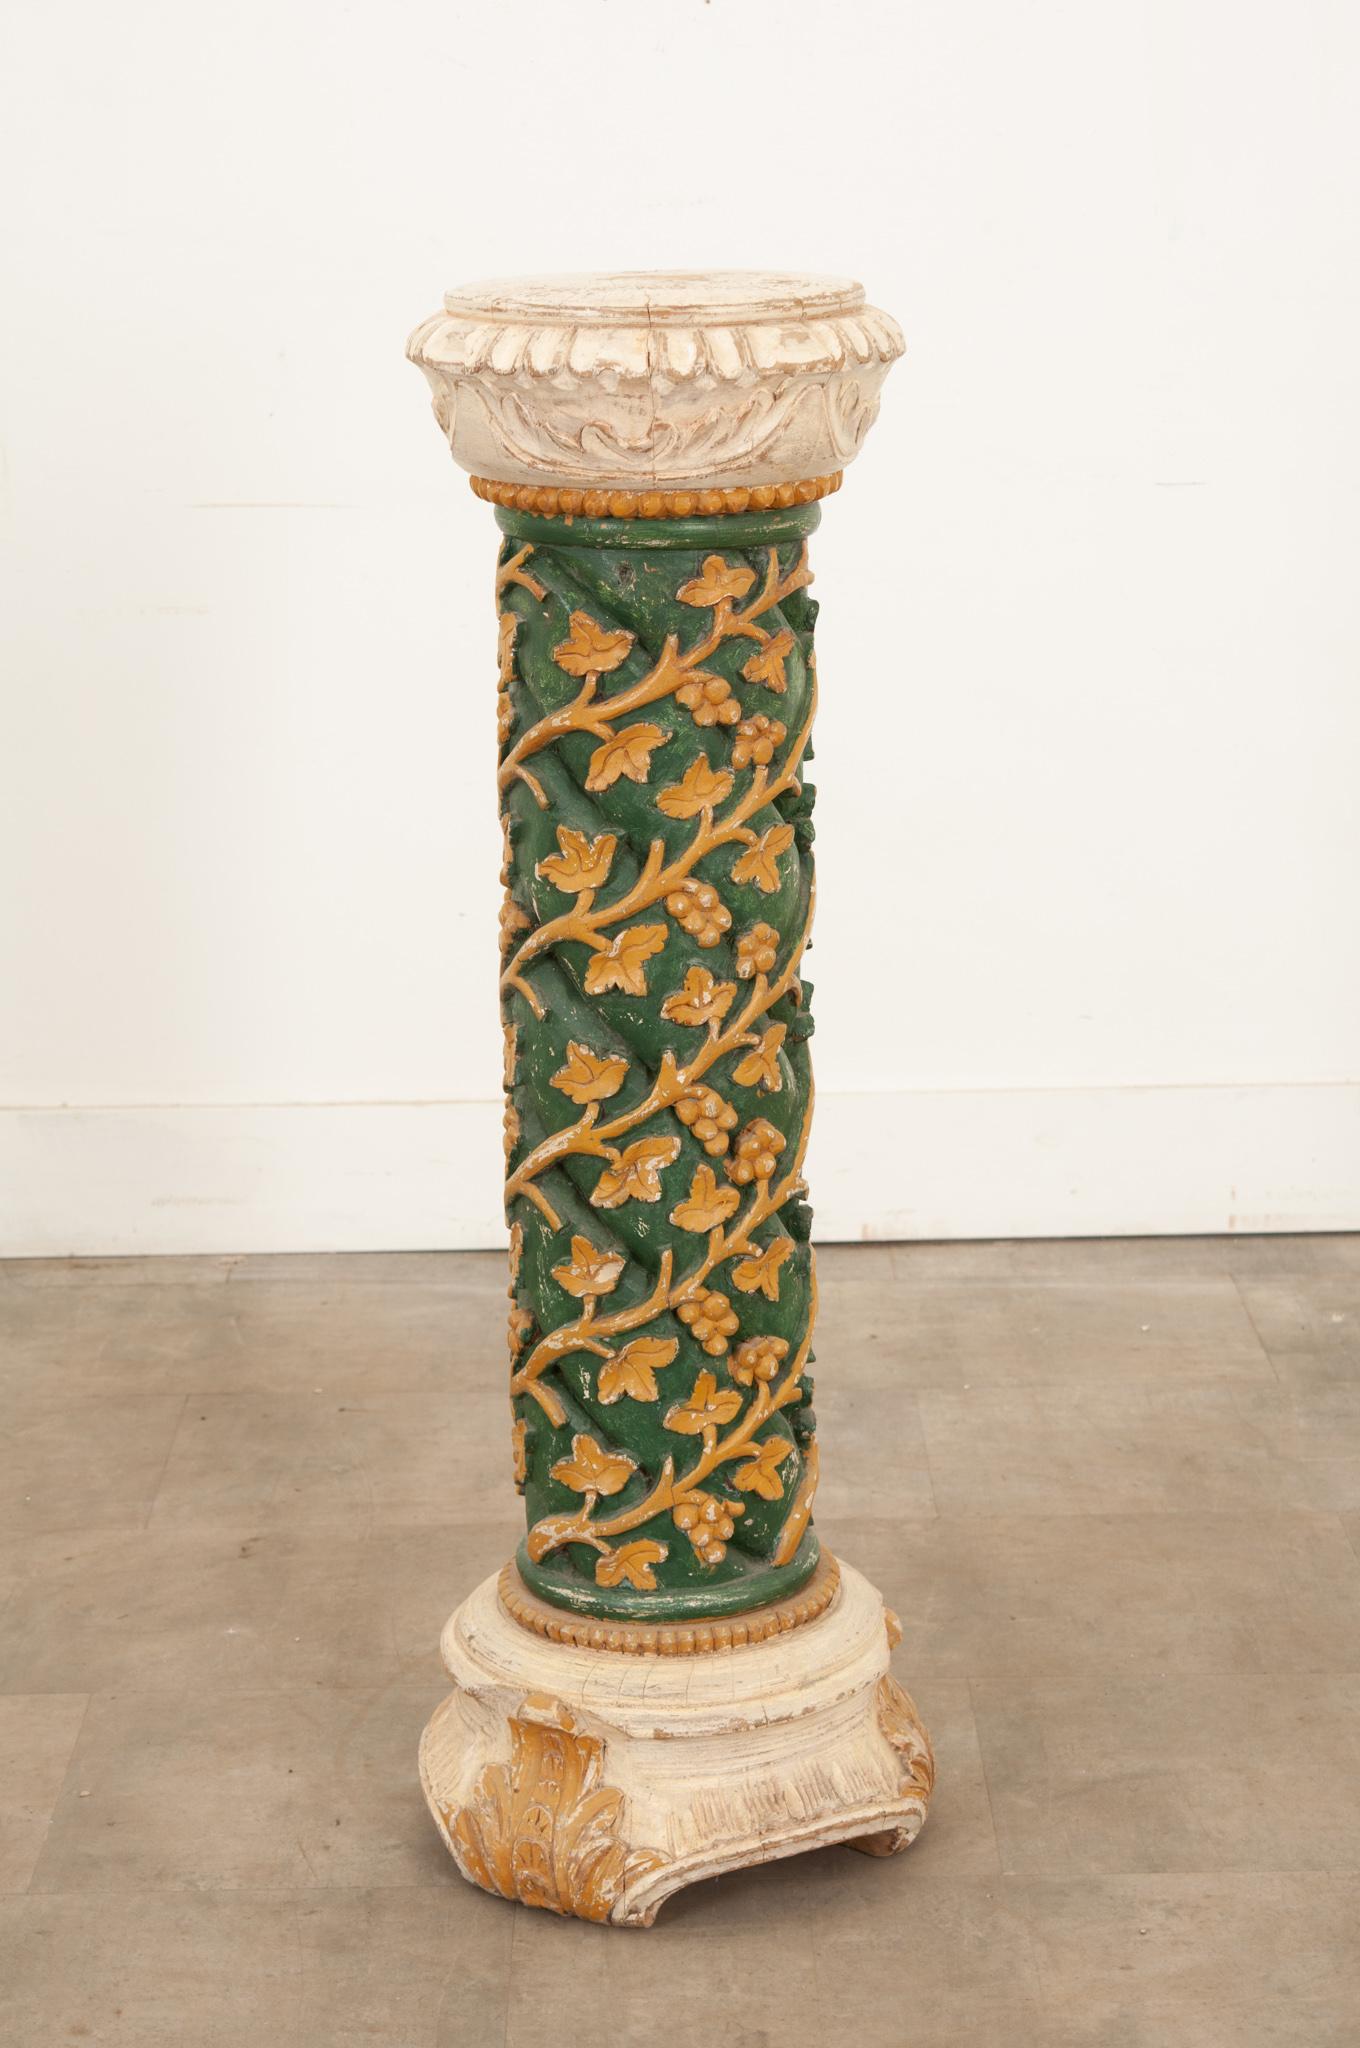 A highly decorative antique pedestal column hand-carved from solid wood with twisting garland detailing and beautiful colors throughout. Elaborately hand-carved out of a large piece of solid wood, this column impresses with a fantastic design.